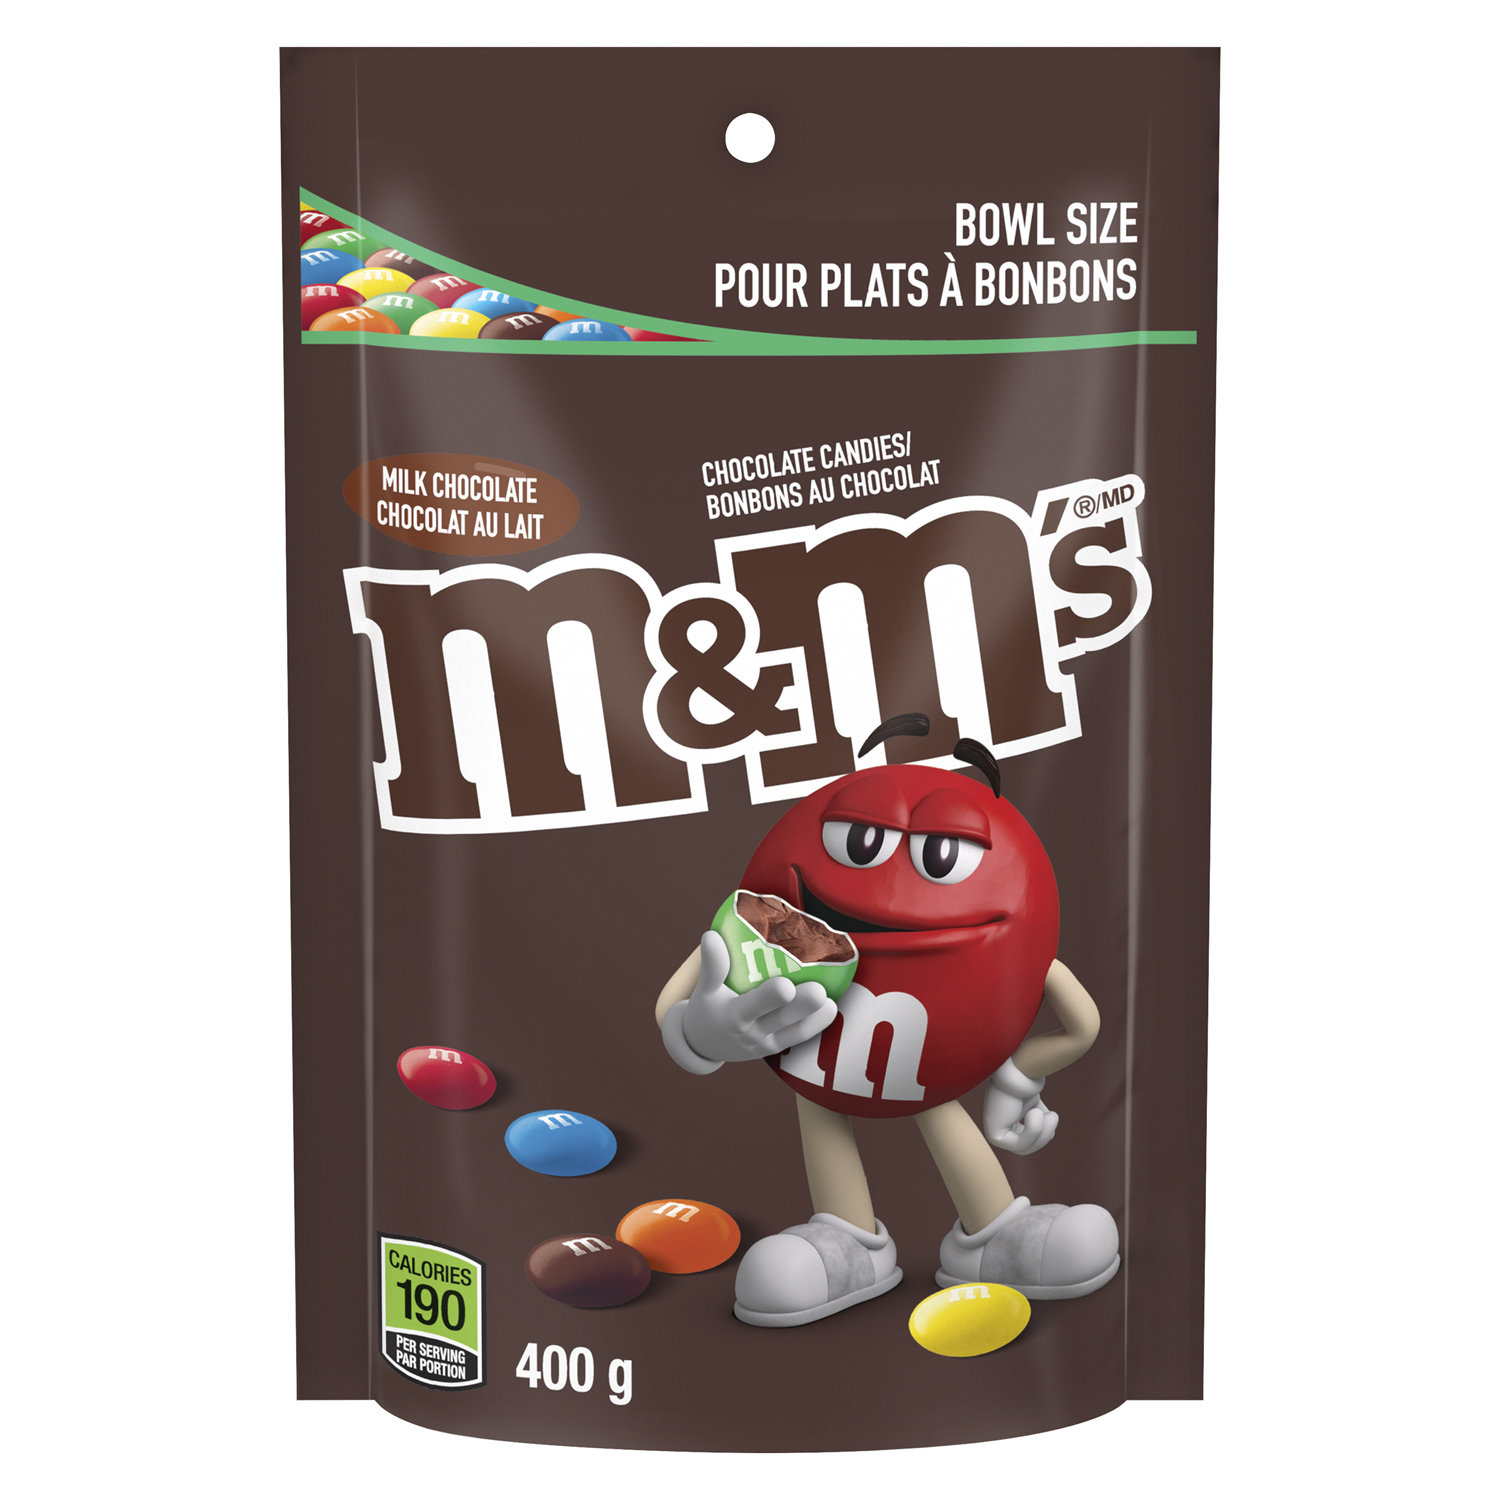 Save on M&M's Peanut Chocolate Candies Red White & Blue Sharing